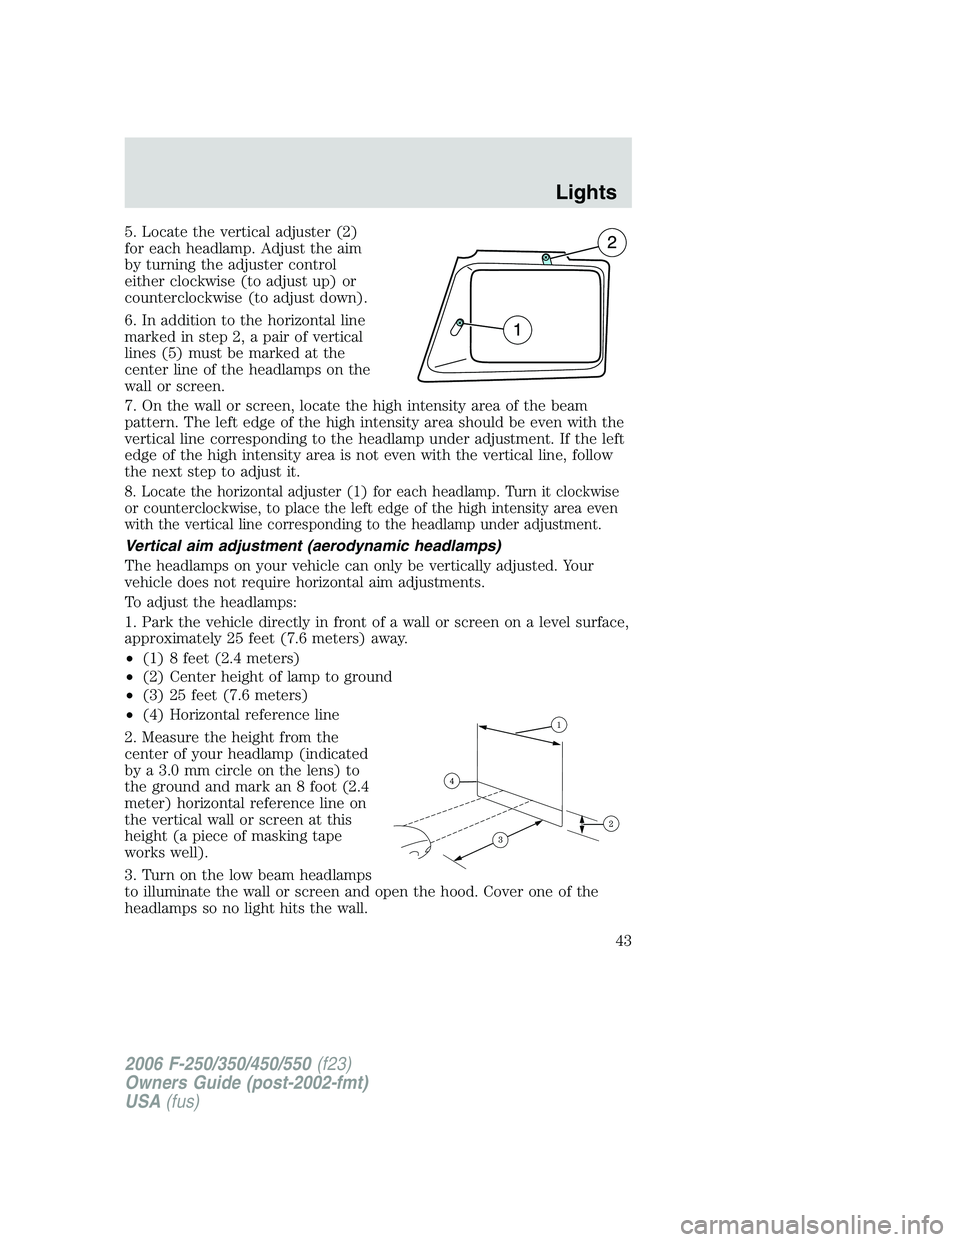 FORD F250 2006  Owners Manual 5. Locate the vertical adjuster (2)
for each headlamp. Adjust the aim
by turning the adjuster control
either clockwise (to adjust up) or
counterclockwise (to adjust down).
6. In addition to the horizo